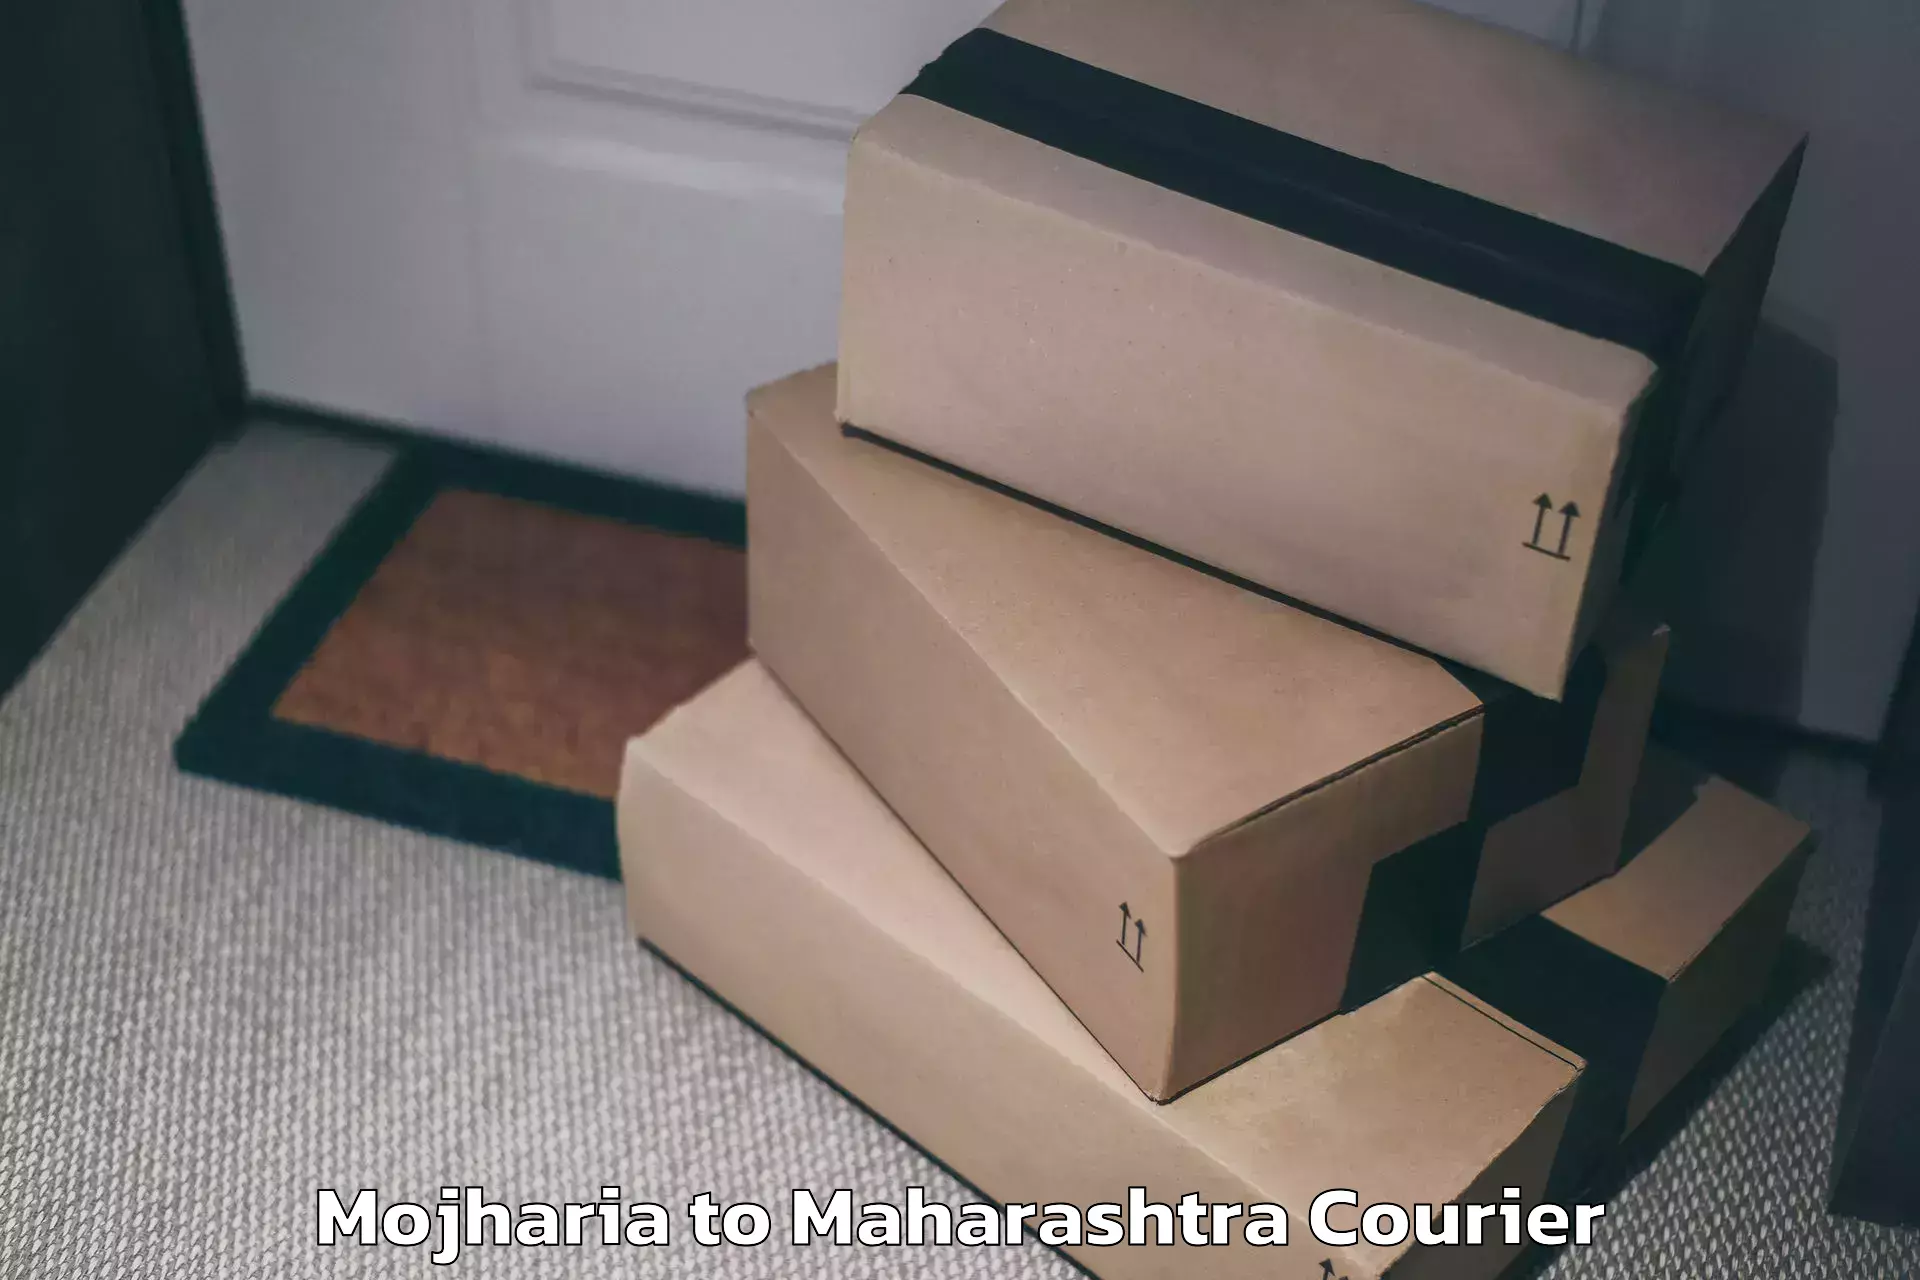 Luggage transport consultancy Mojharia to Parbhani